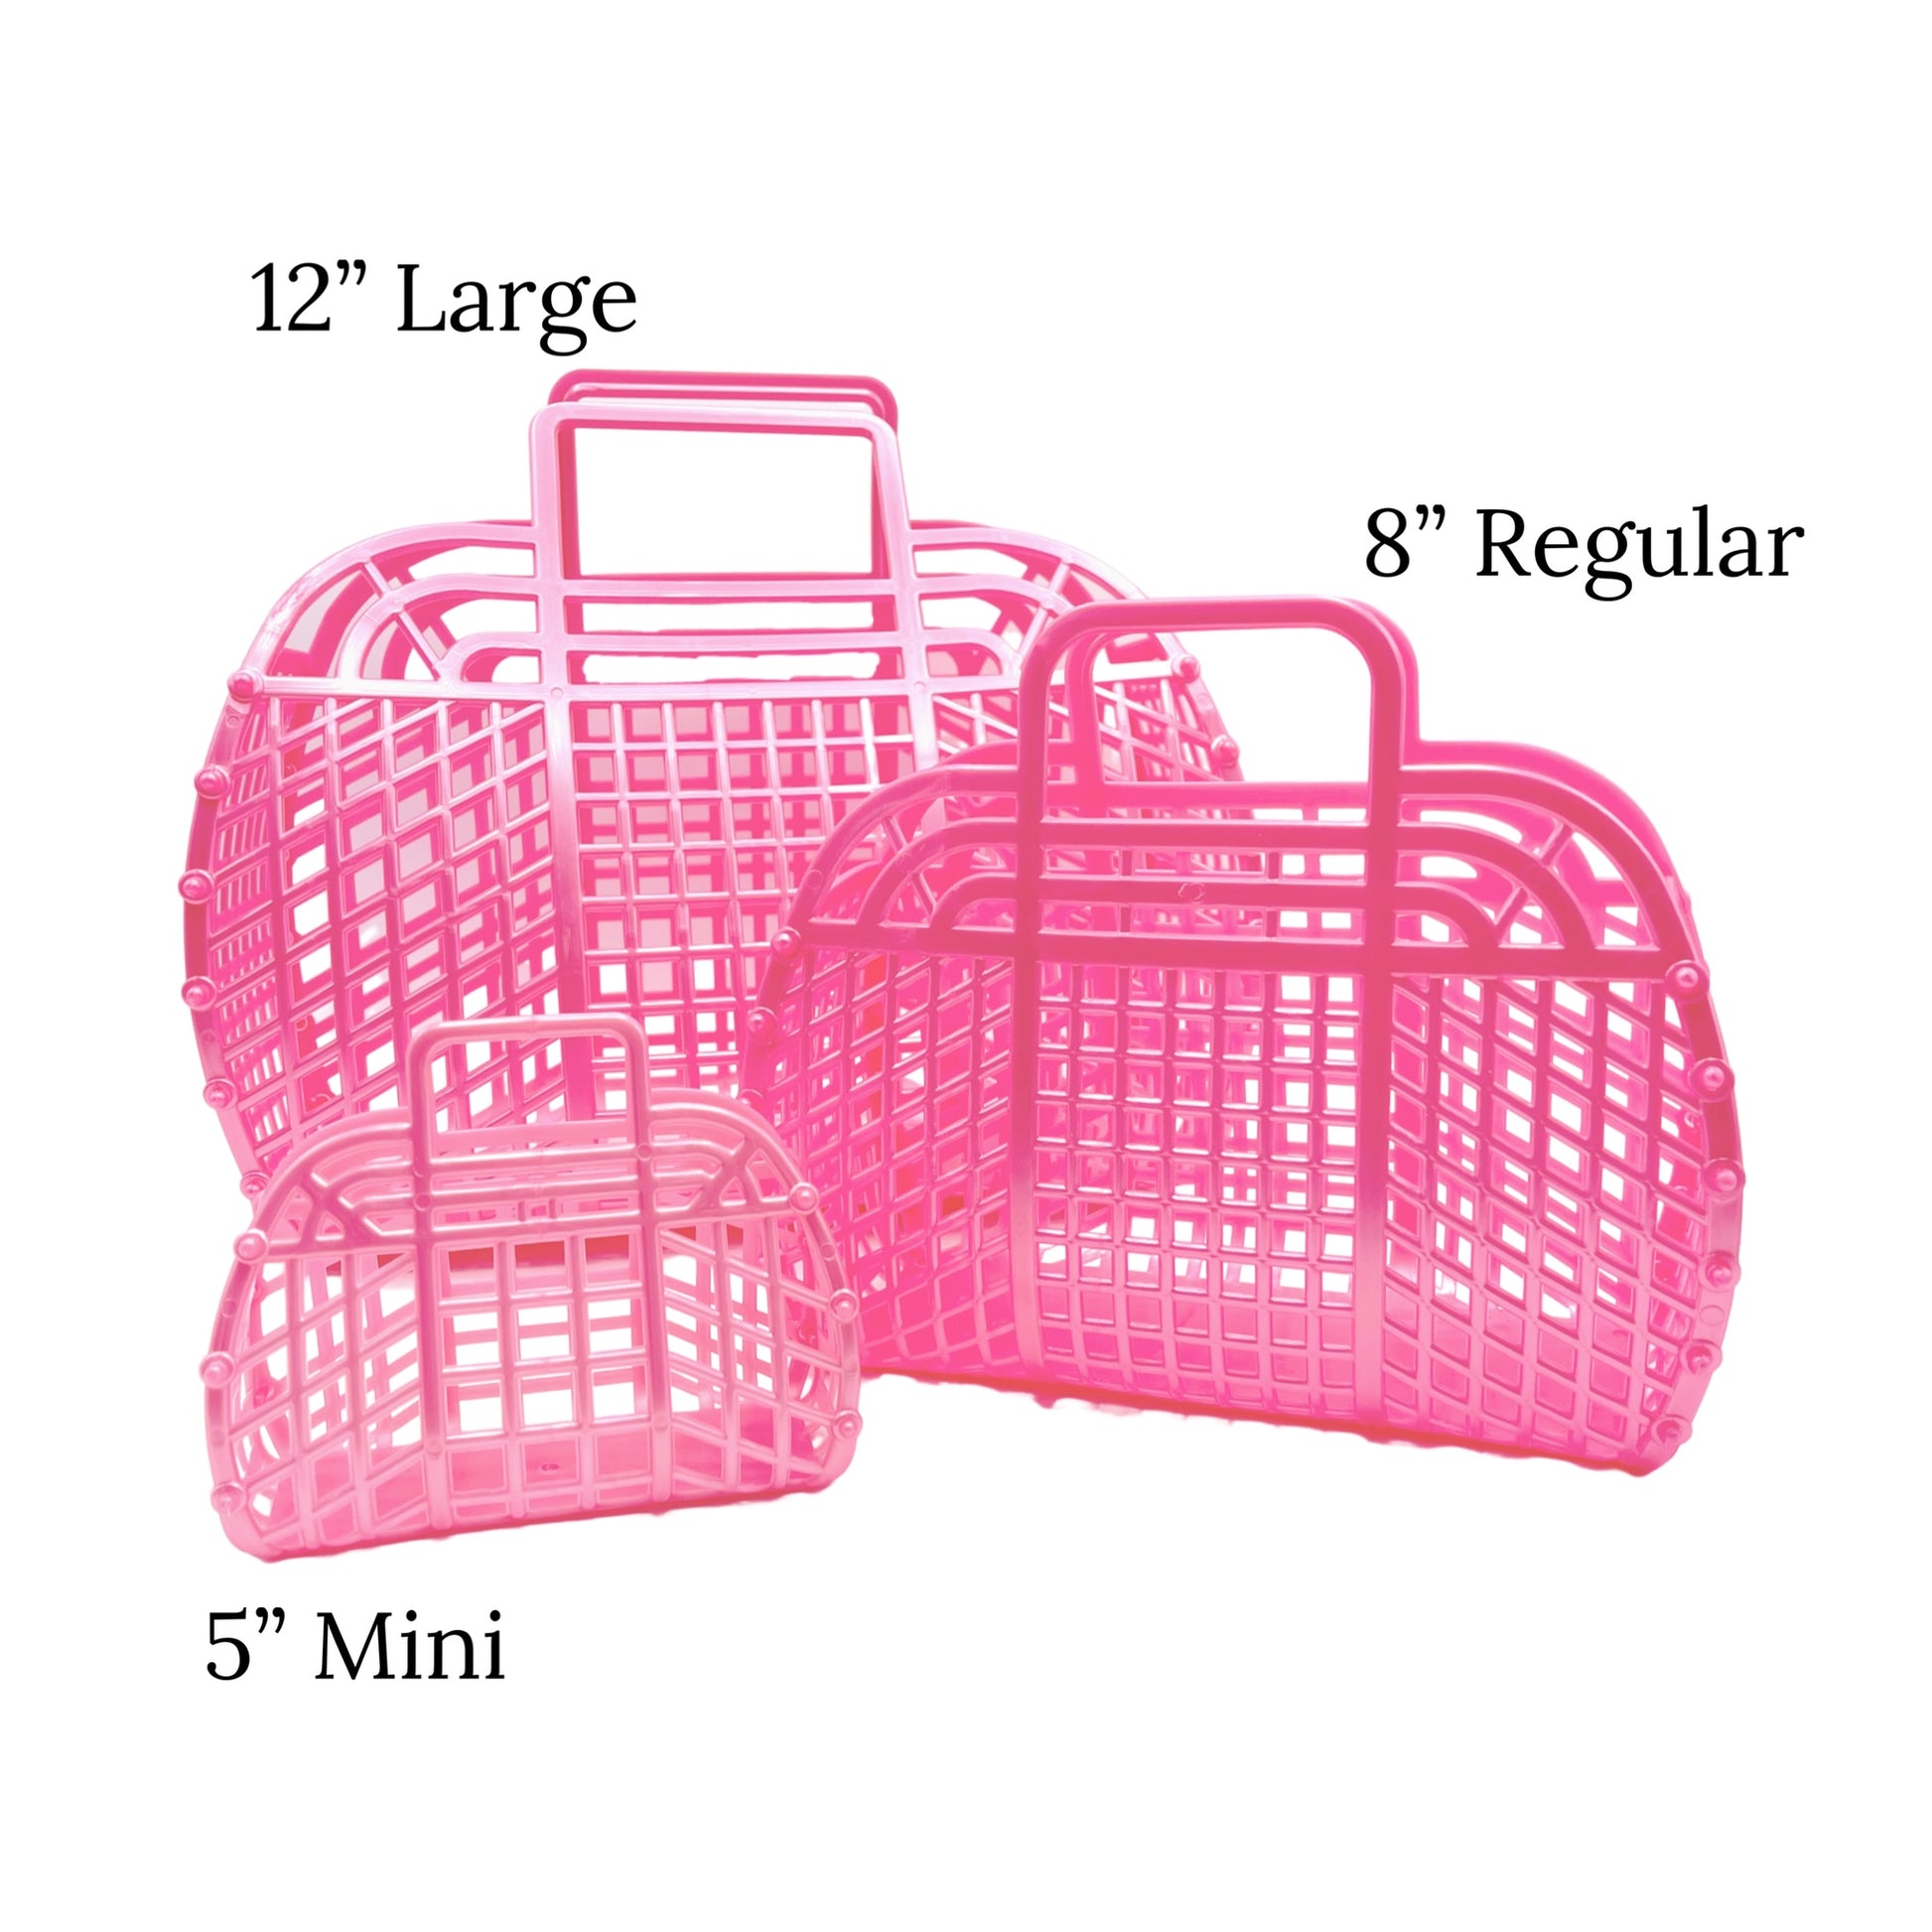 shimmer pink jelly bags with sizes